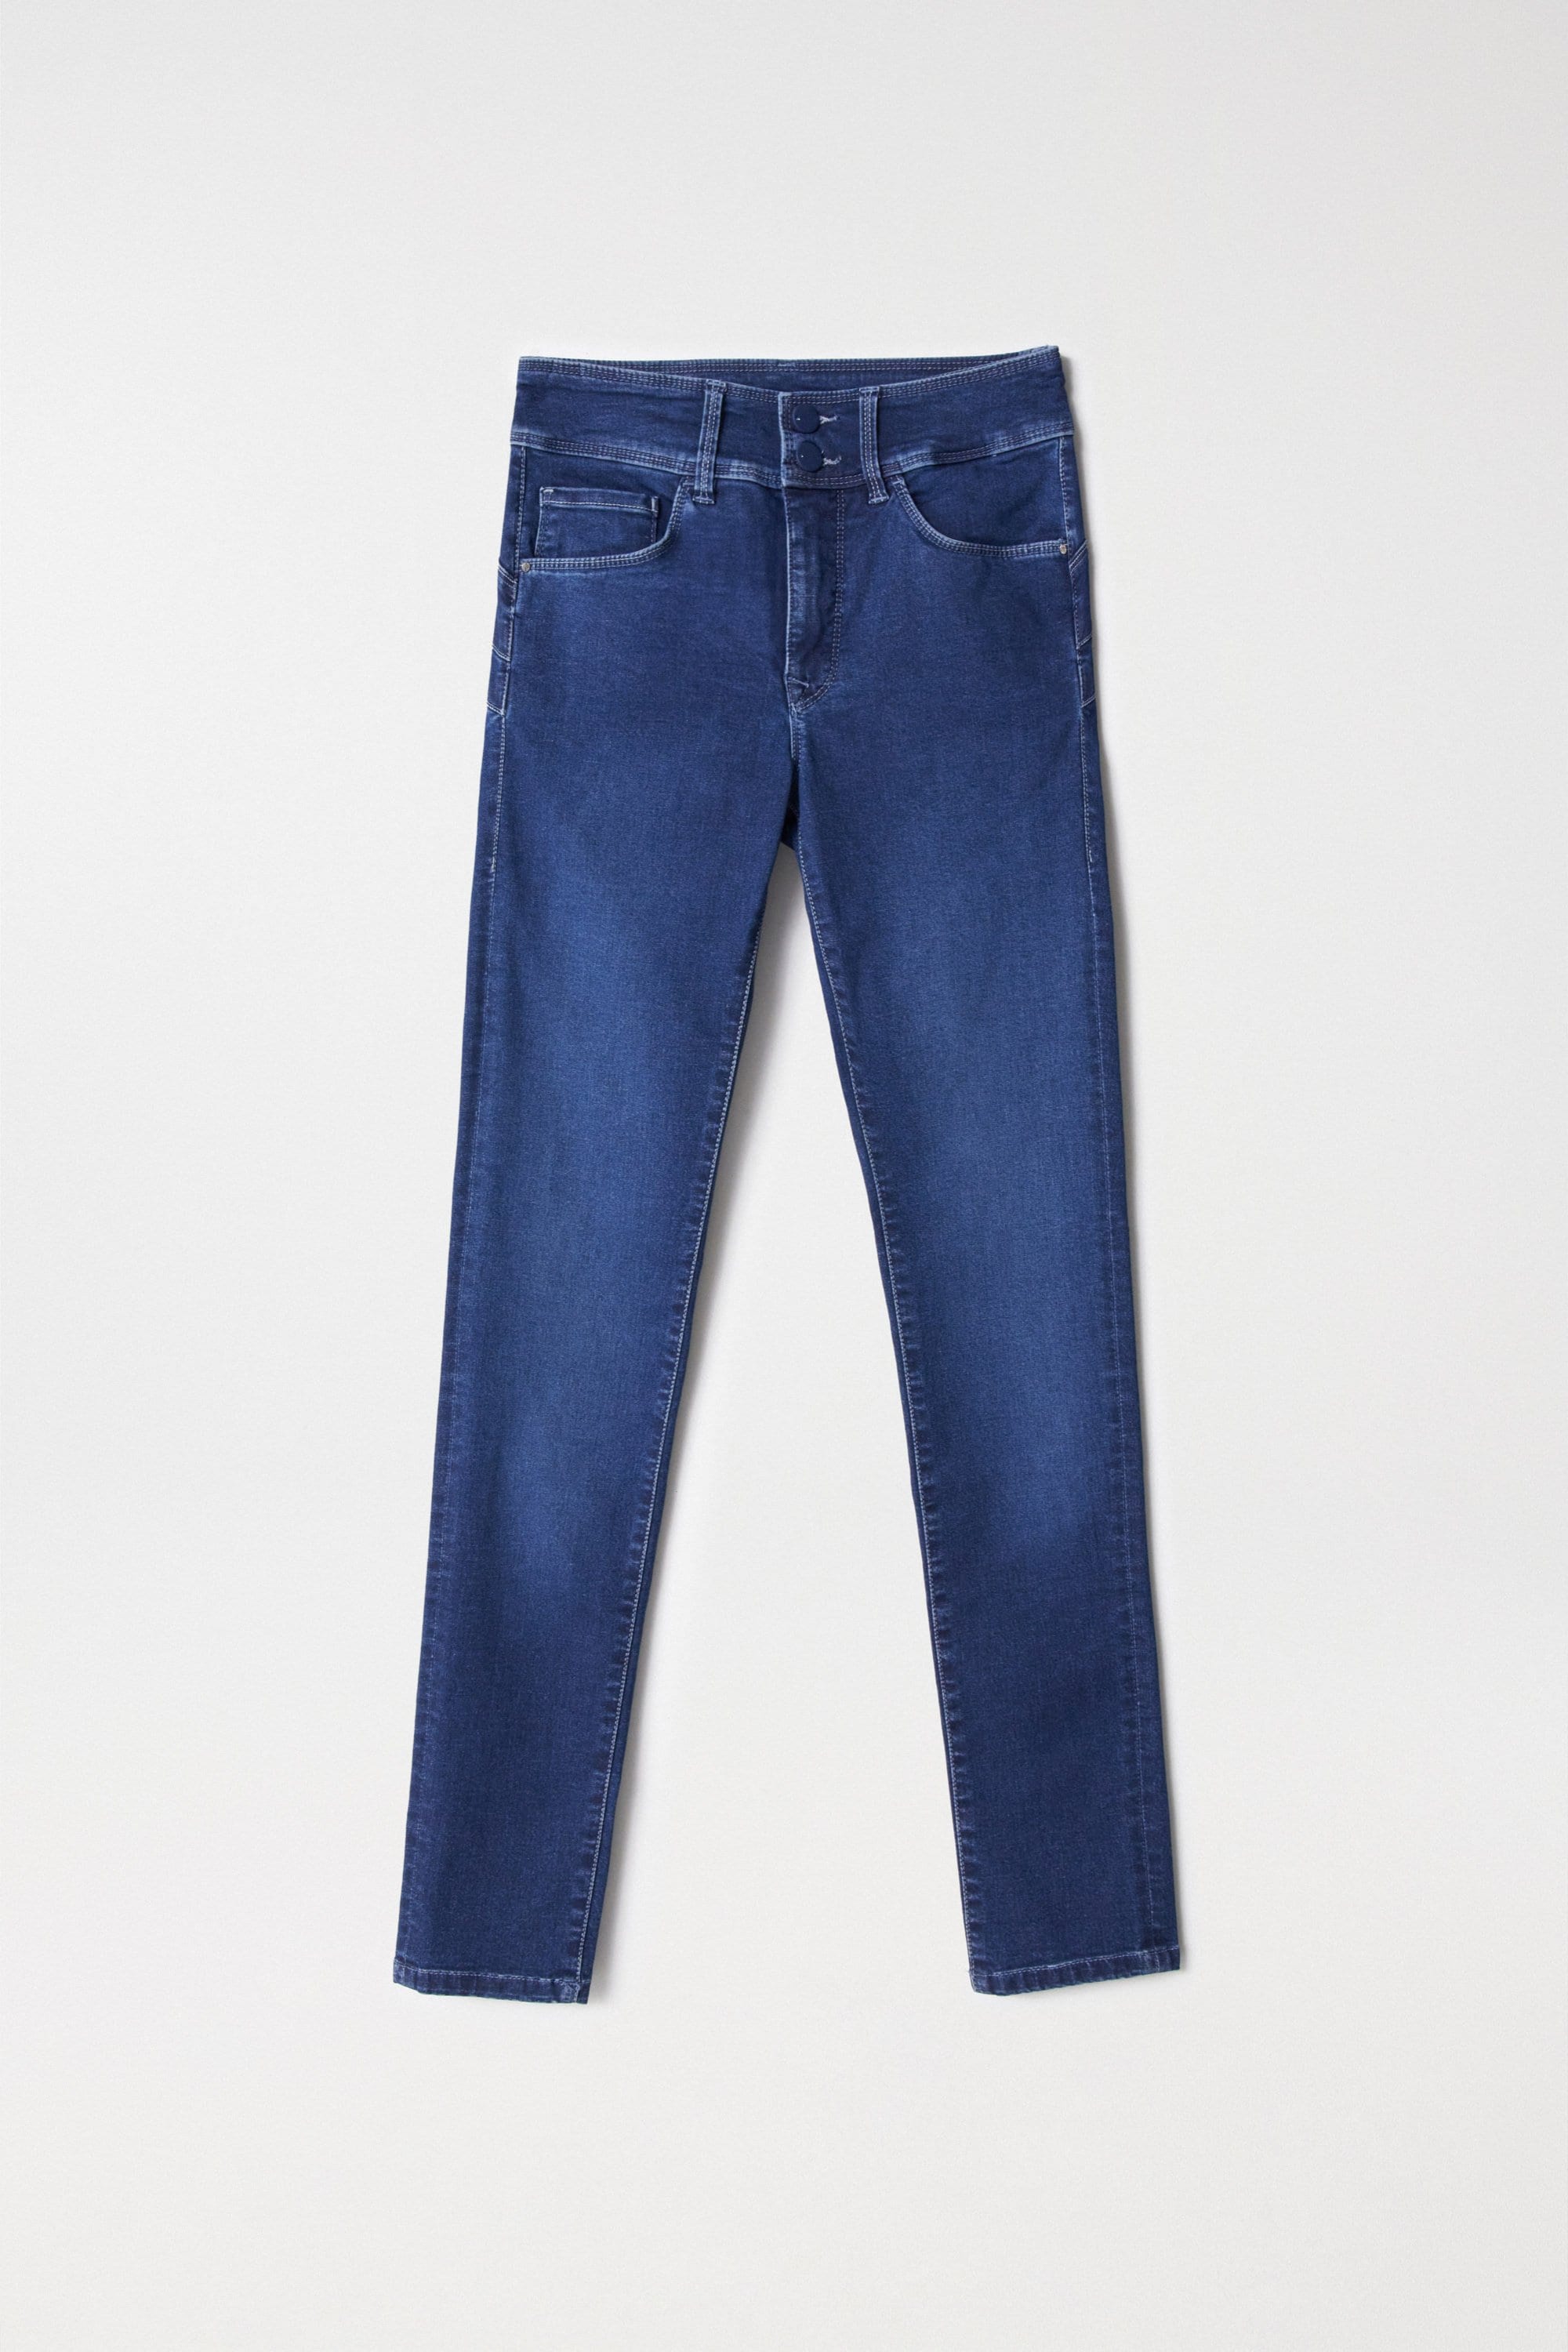 Secret With Embroidery in Medium Wash Jeans Salsa Jeans   